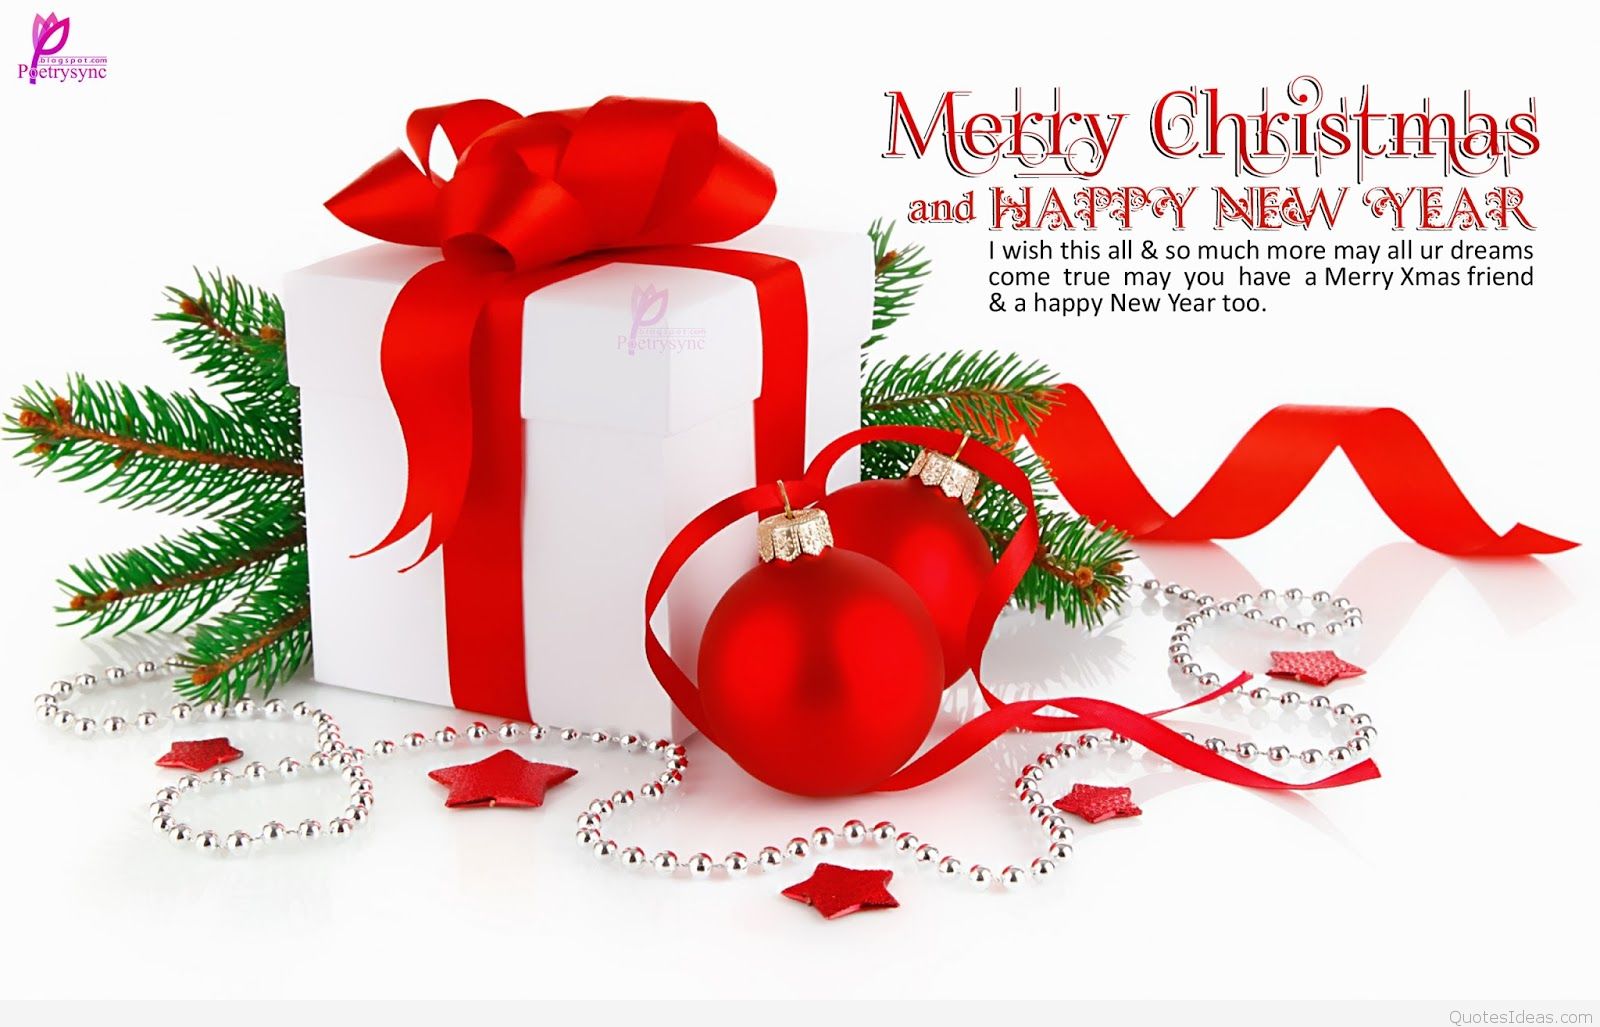 Merry Christmas Greetings Wishes Quotes